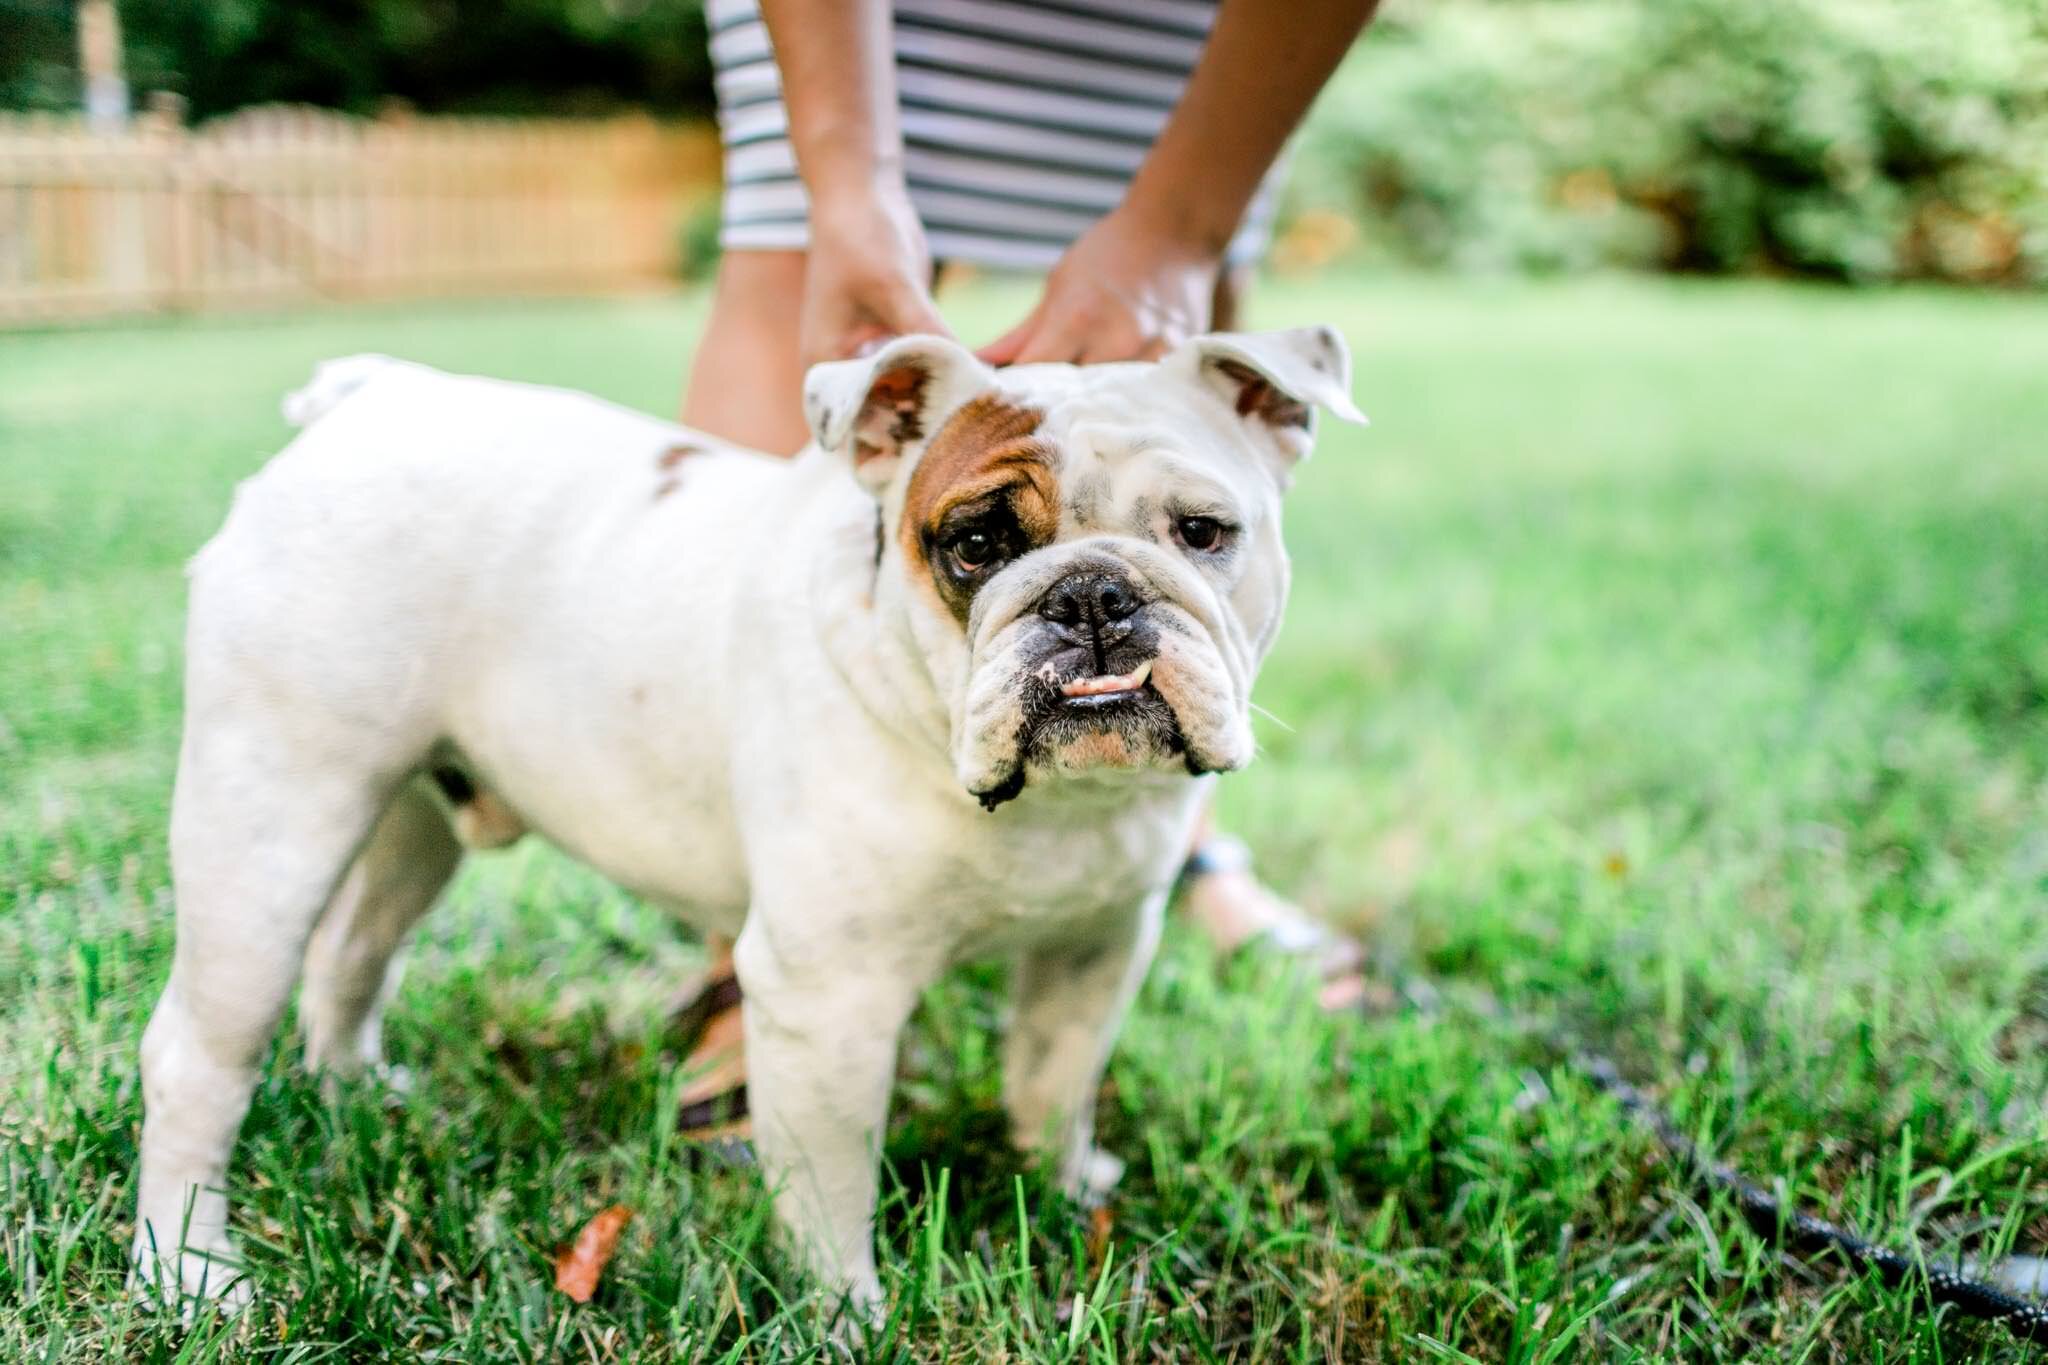 Durham Maternity Photographer | By G. Lin Photography | Bulldog standing outside on grass